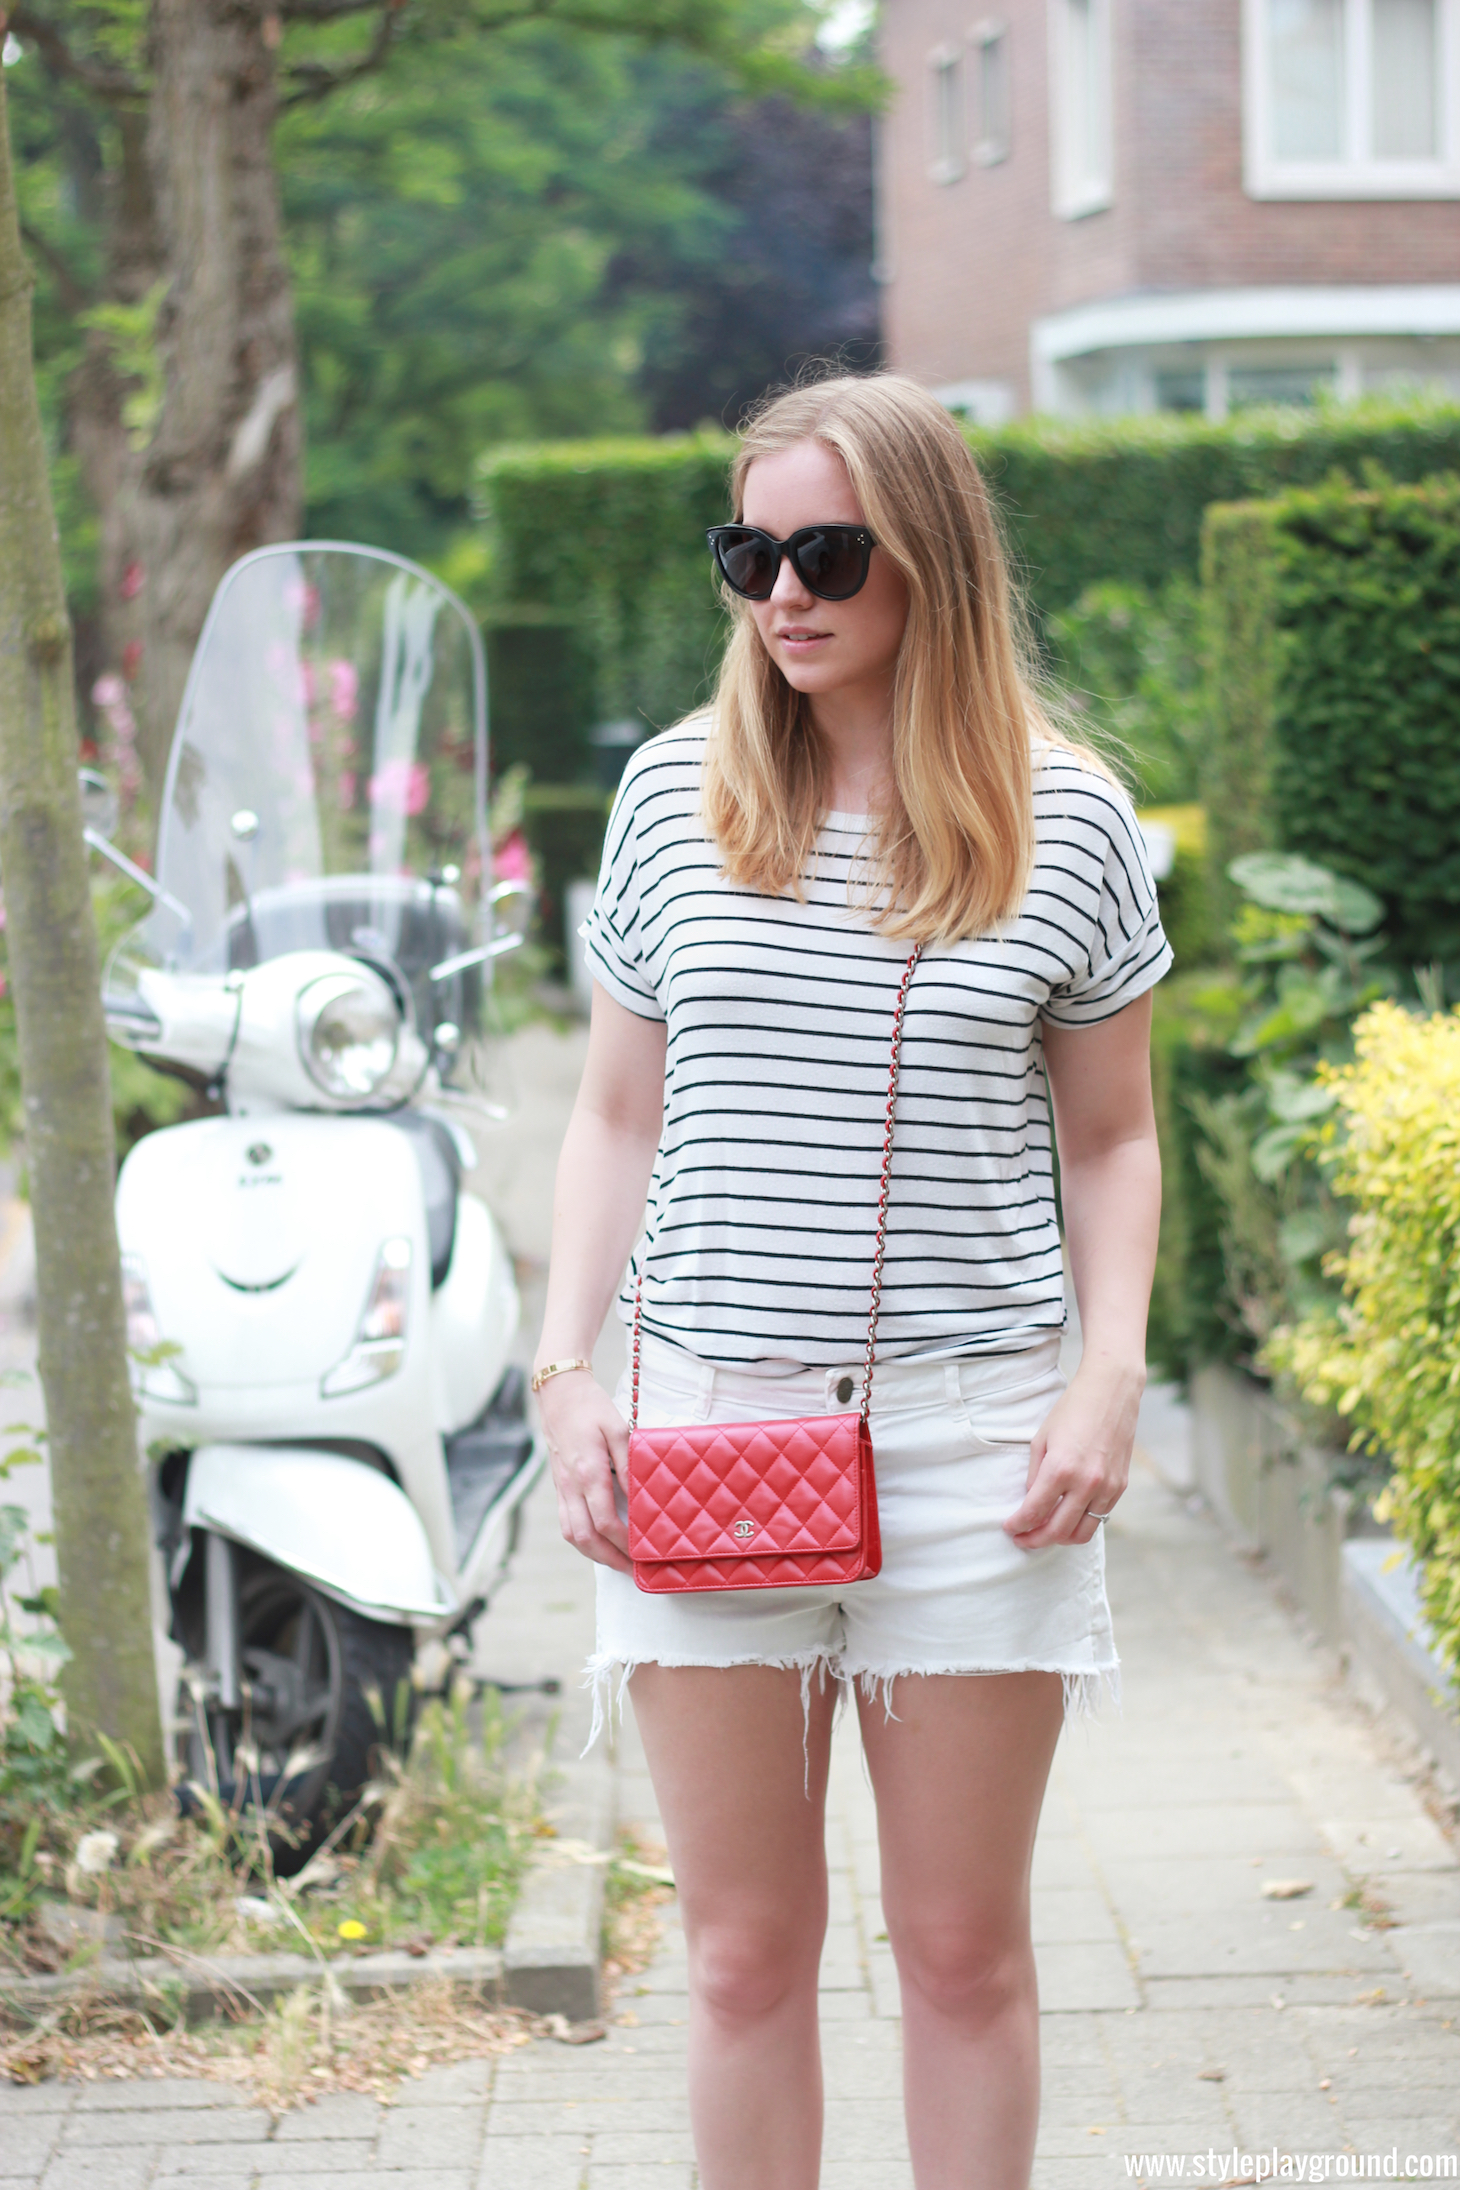 Axelle Blanpain from Style playground is wearing Zara shorts & t-shirt, white Converse sneakers, Chanel red WOC, Celine Audrey sunglasses